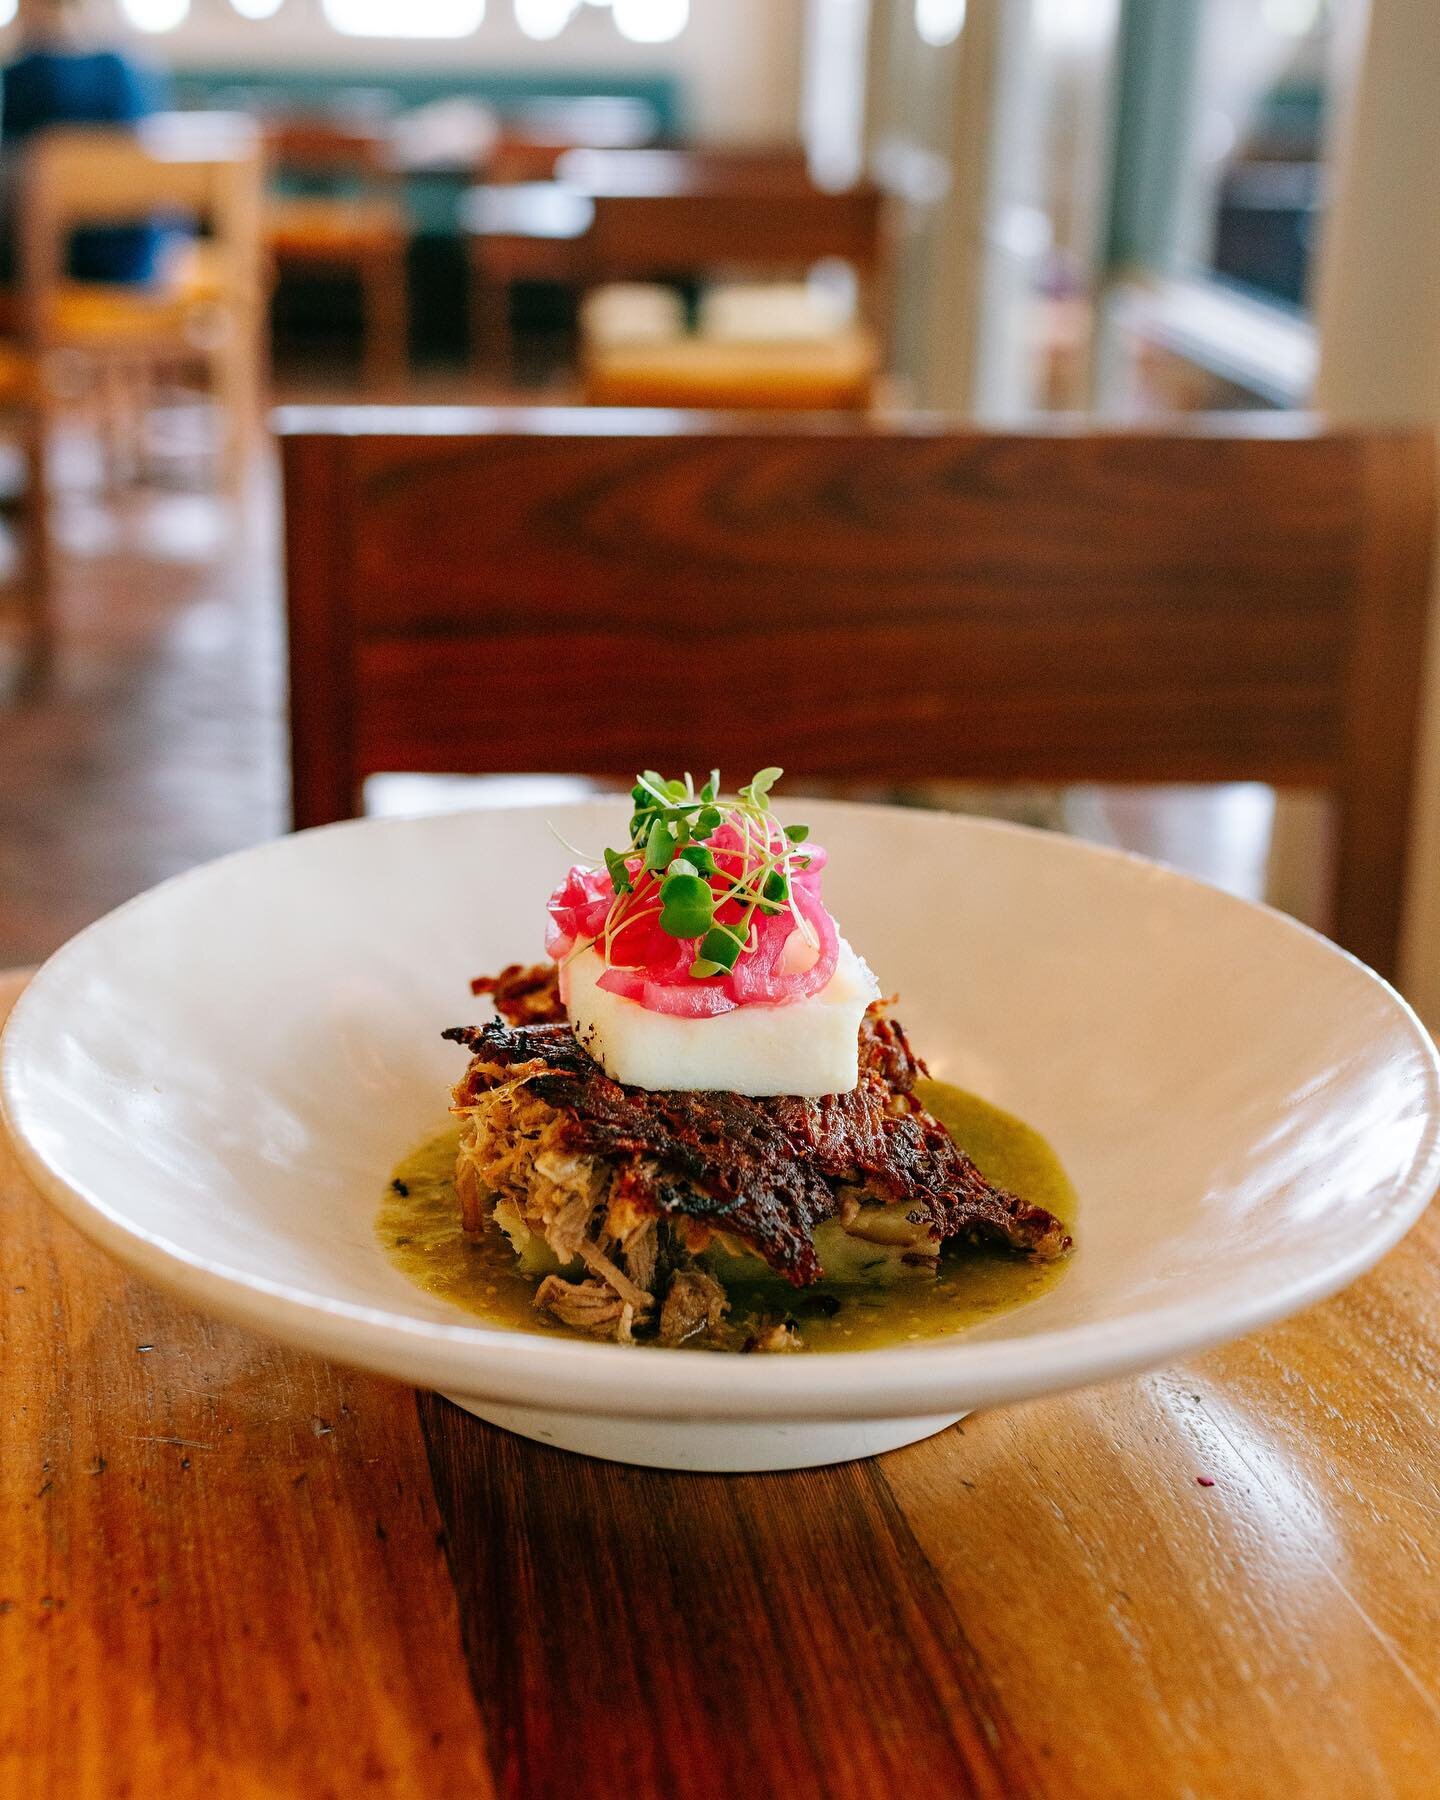 Mother&rsquo;s Day Brunch 
This is your sign to make you weekend brunch reservation if you have not! It&rsquo;s the perfect way to show Mom some love this weekend. ❤️

Here are a few of our favorites: Carnitas Hash, Huevos Rancheros, and the Cabo Bow